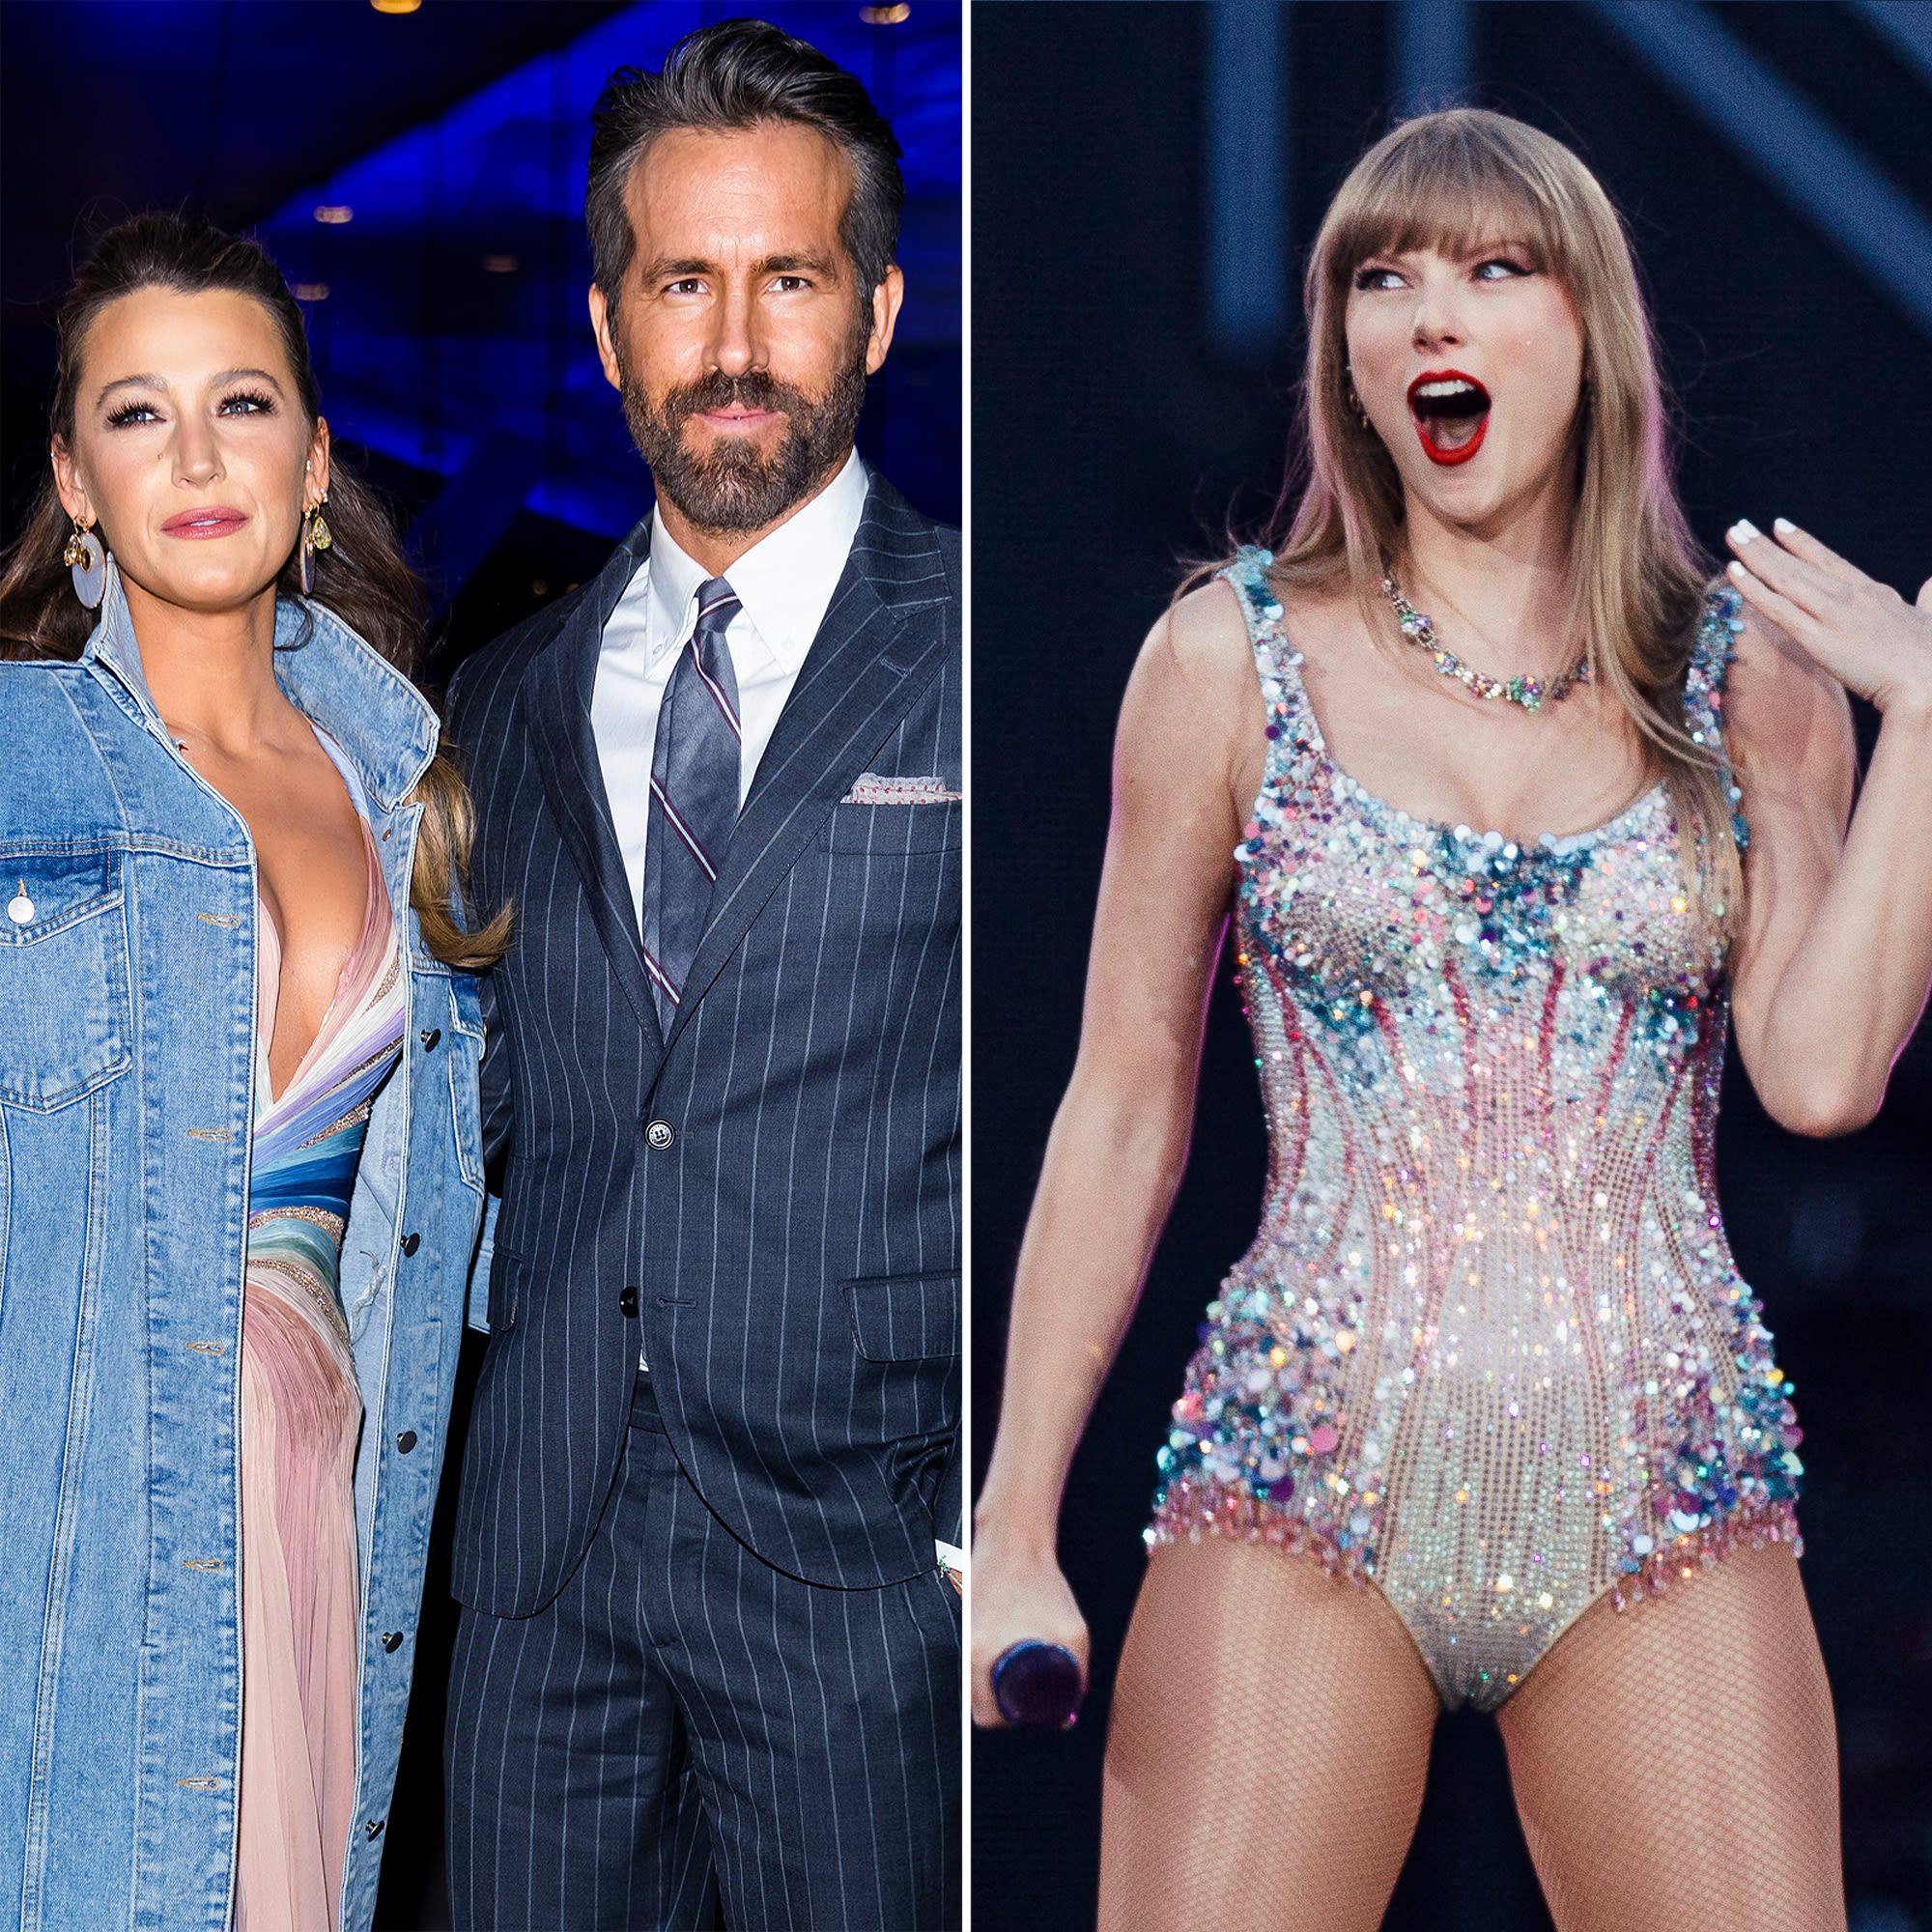 Ryan Reynolds and Blake Lively Attend Taylor Swift’s Concert in Madrid